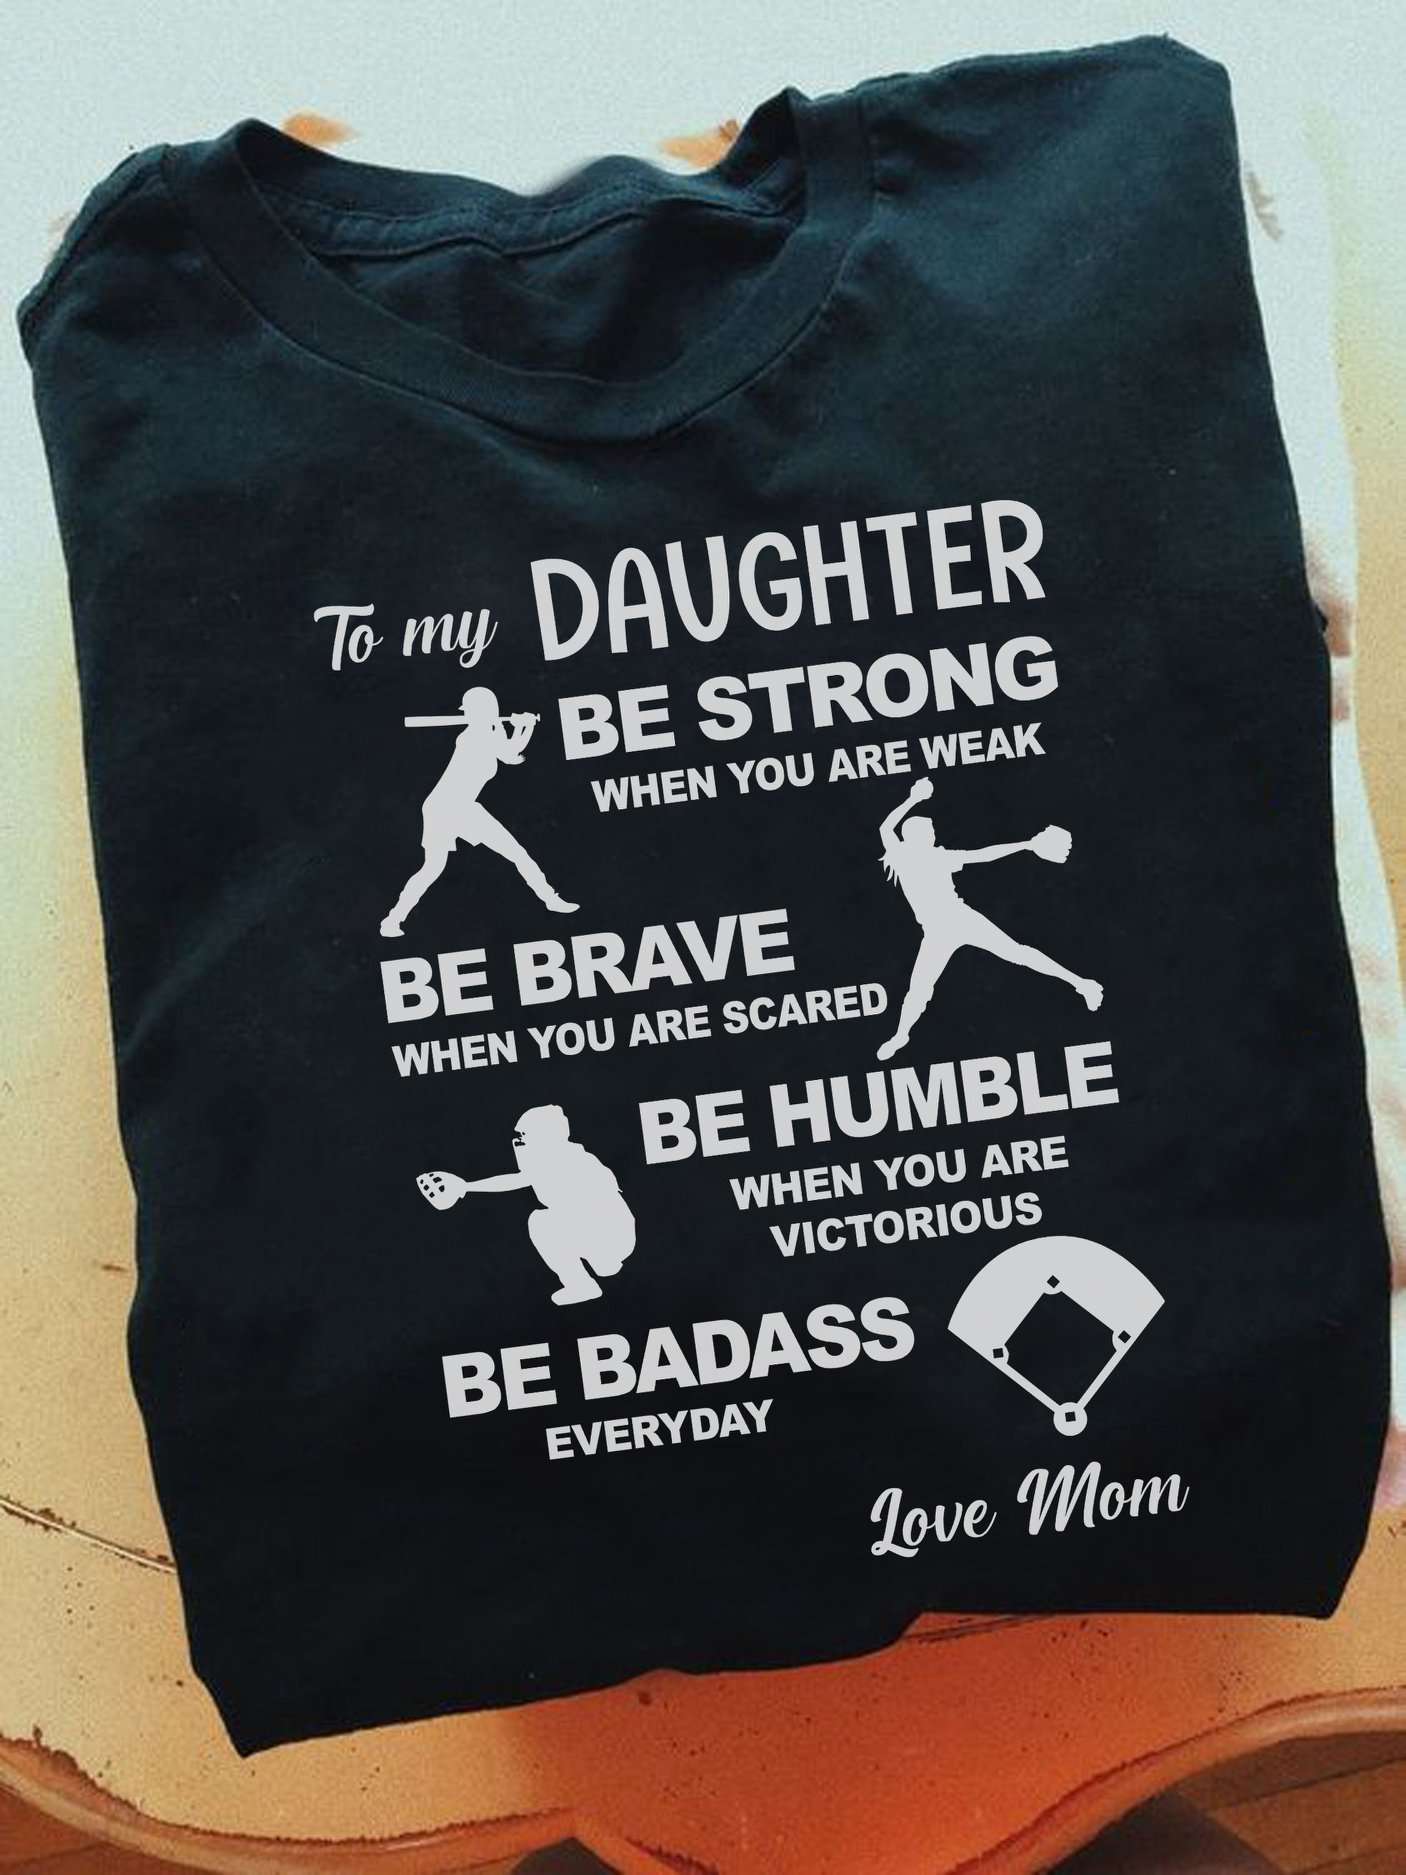 To my daughter - Be strong, be brave, be humble, be badass everyday